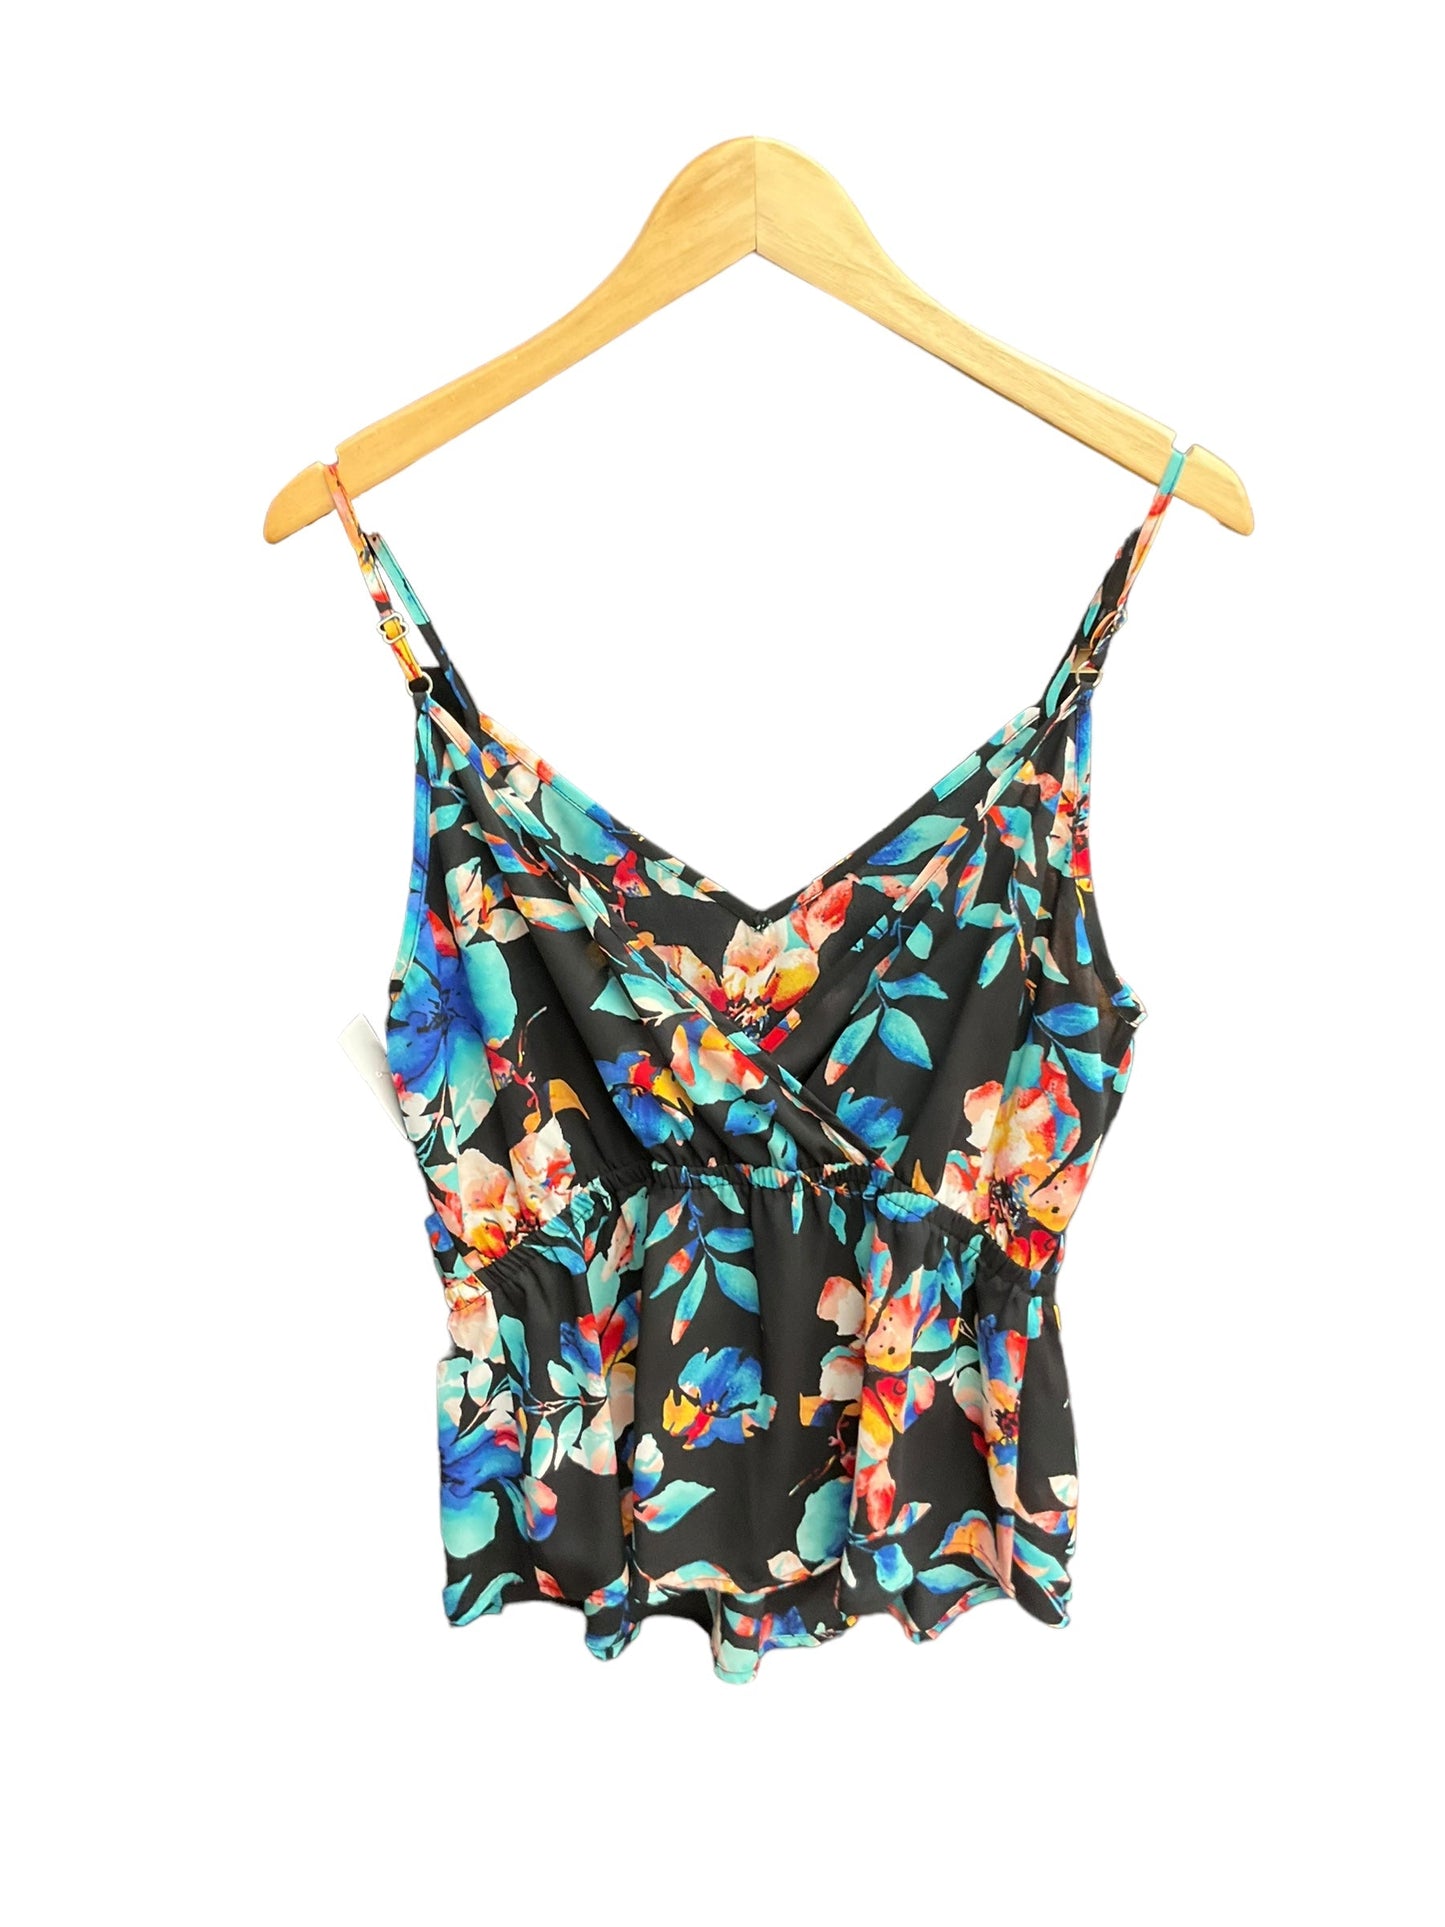 Floral Print Top Sleeveless Lily White, Size L